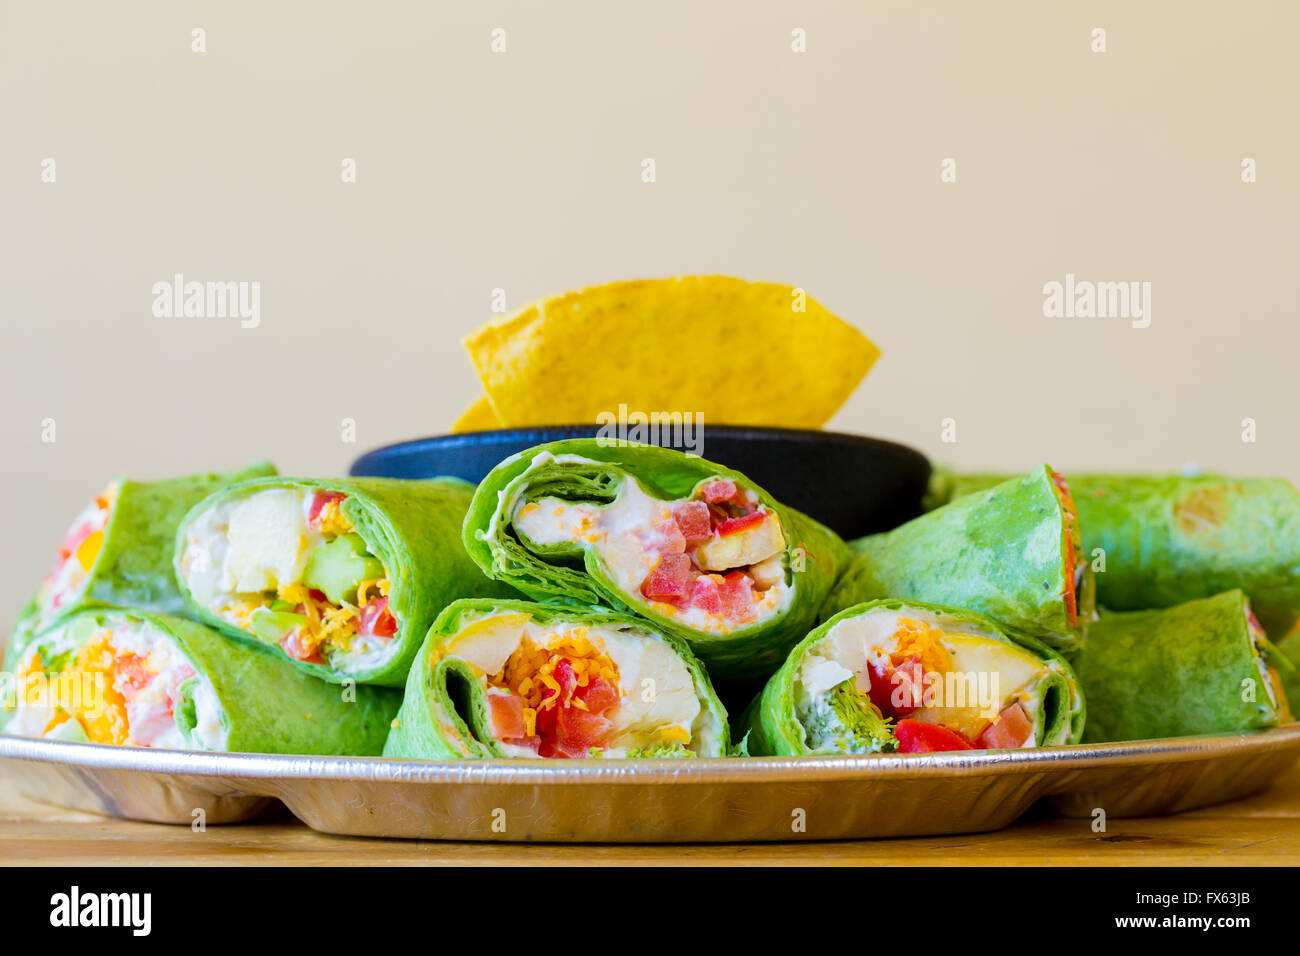 Mexican restaurant offering a gluten-free alternative to their traditional cuisine with these vegan veggie vegetarian wraps. Stock Photo